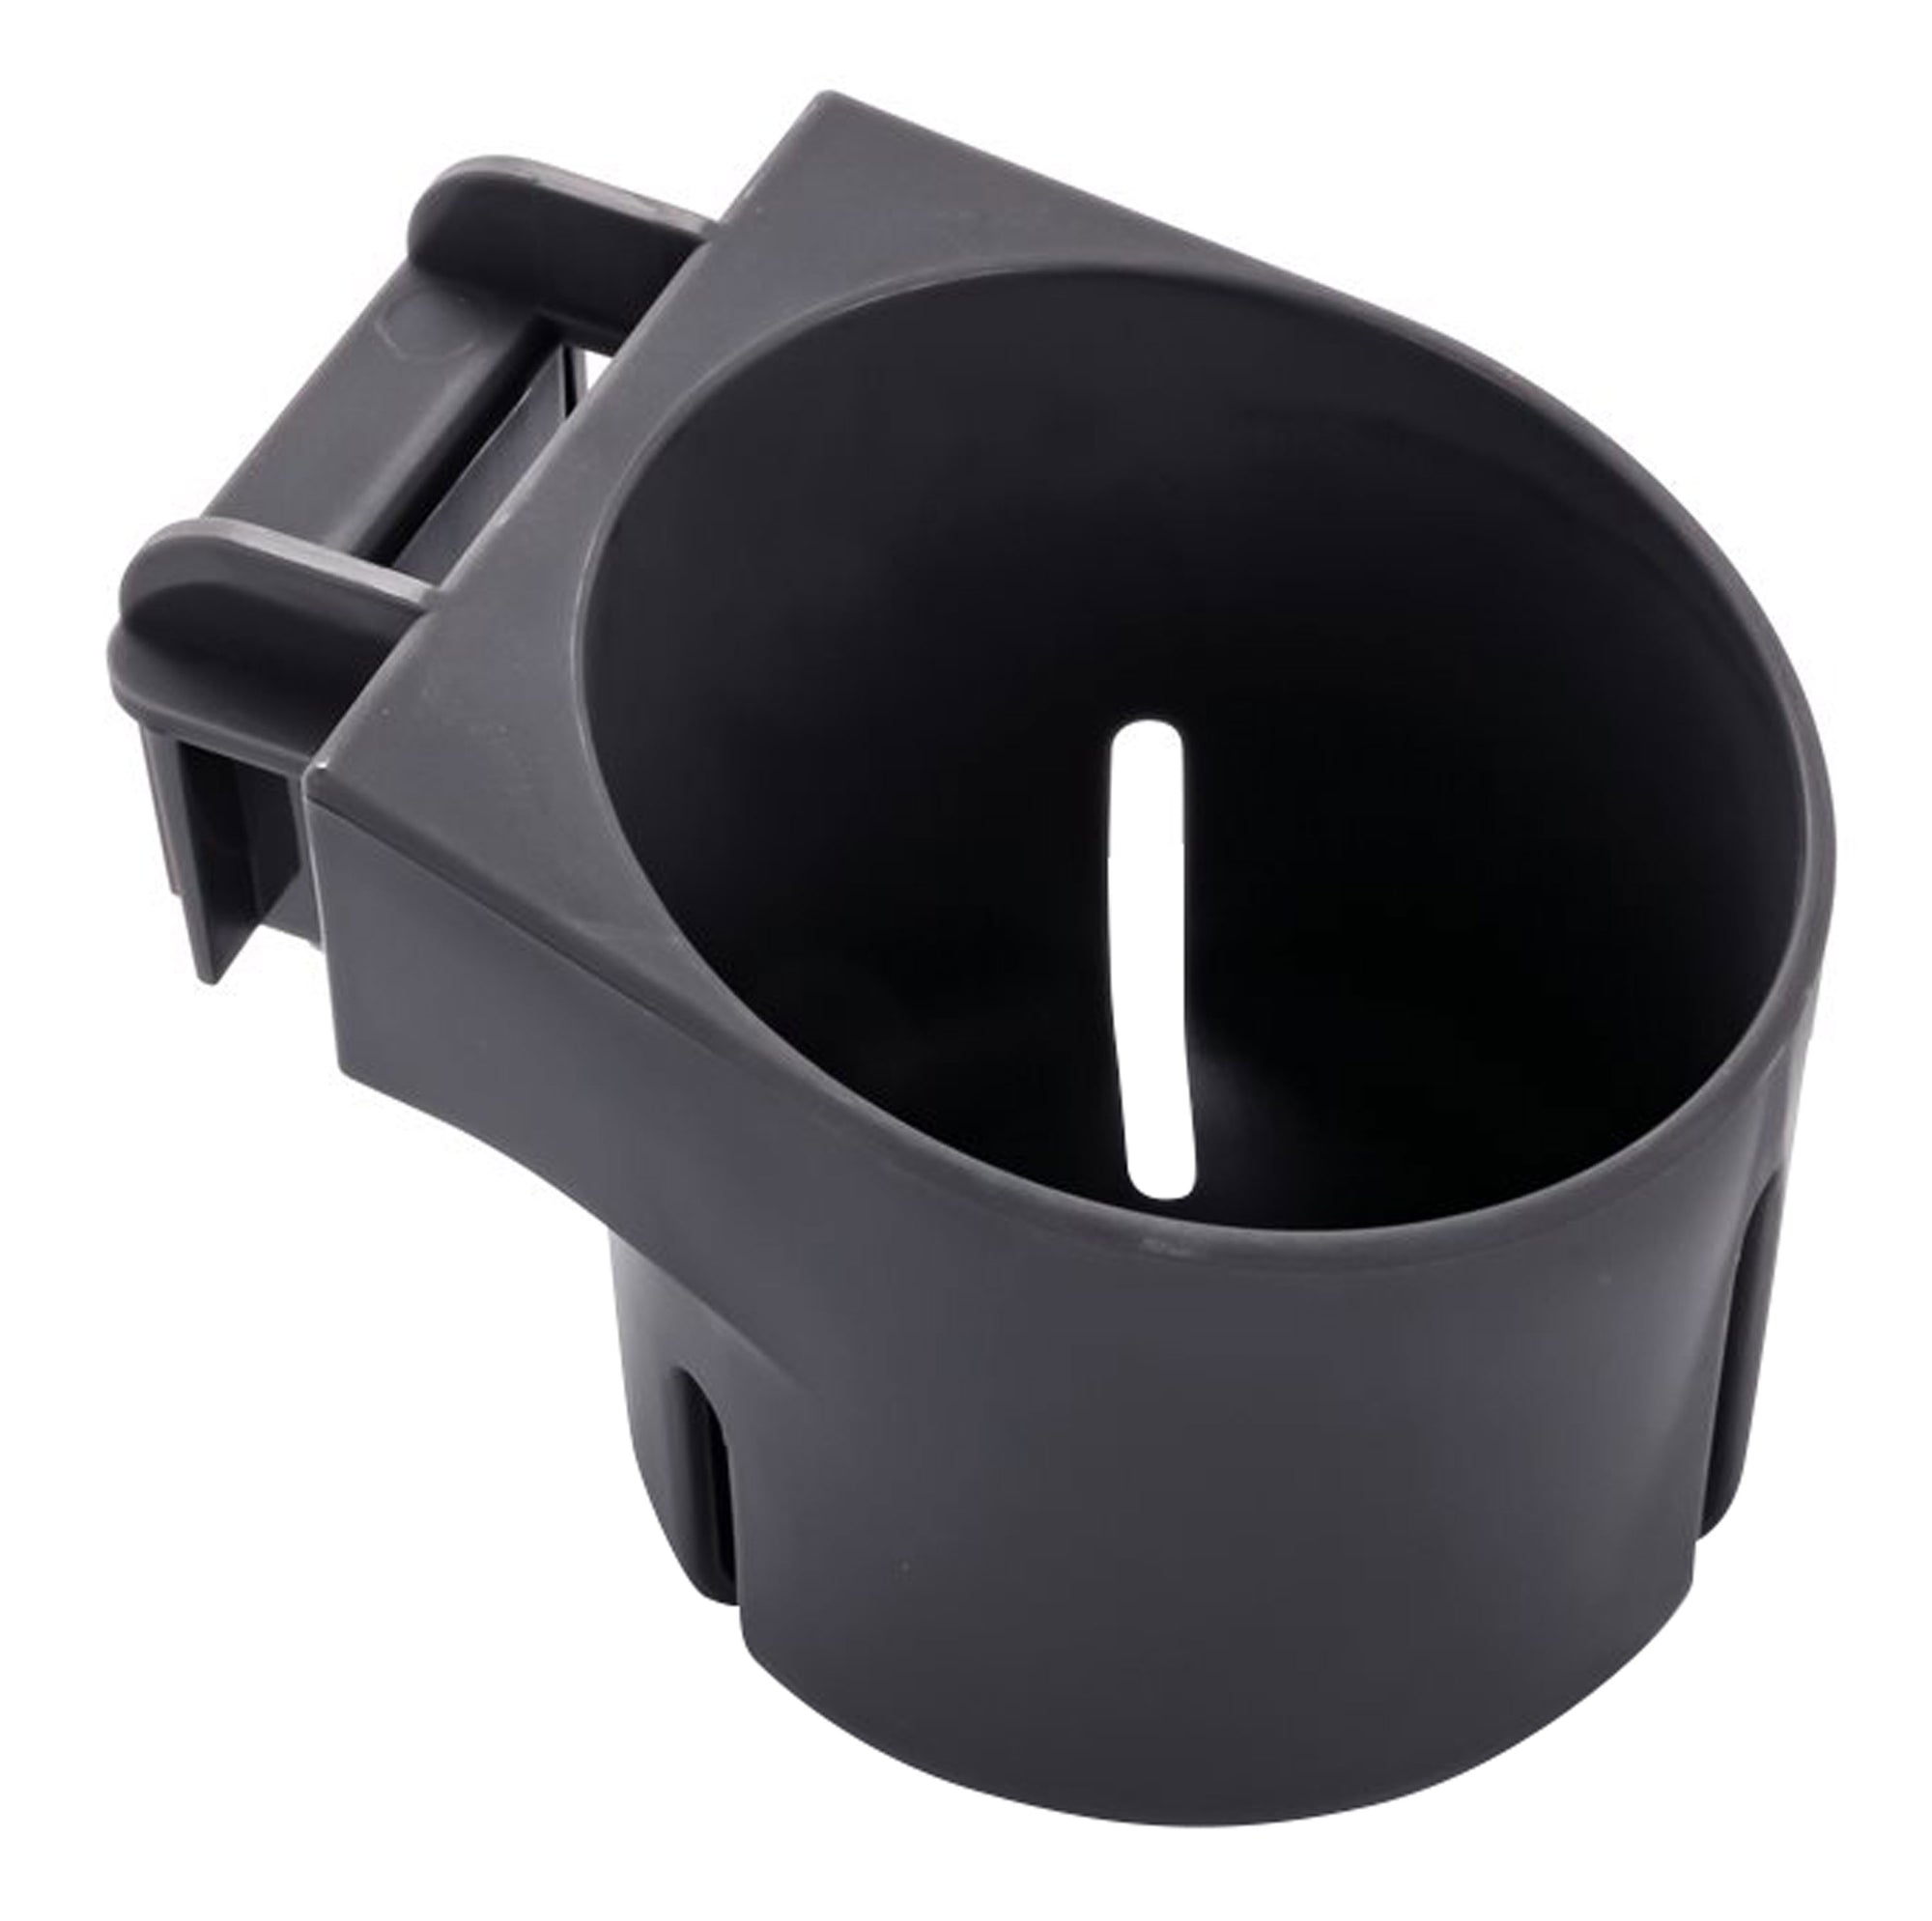 Camco 51791 Currituck Cooler Cup Holder